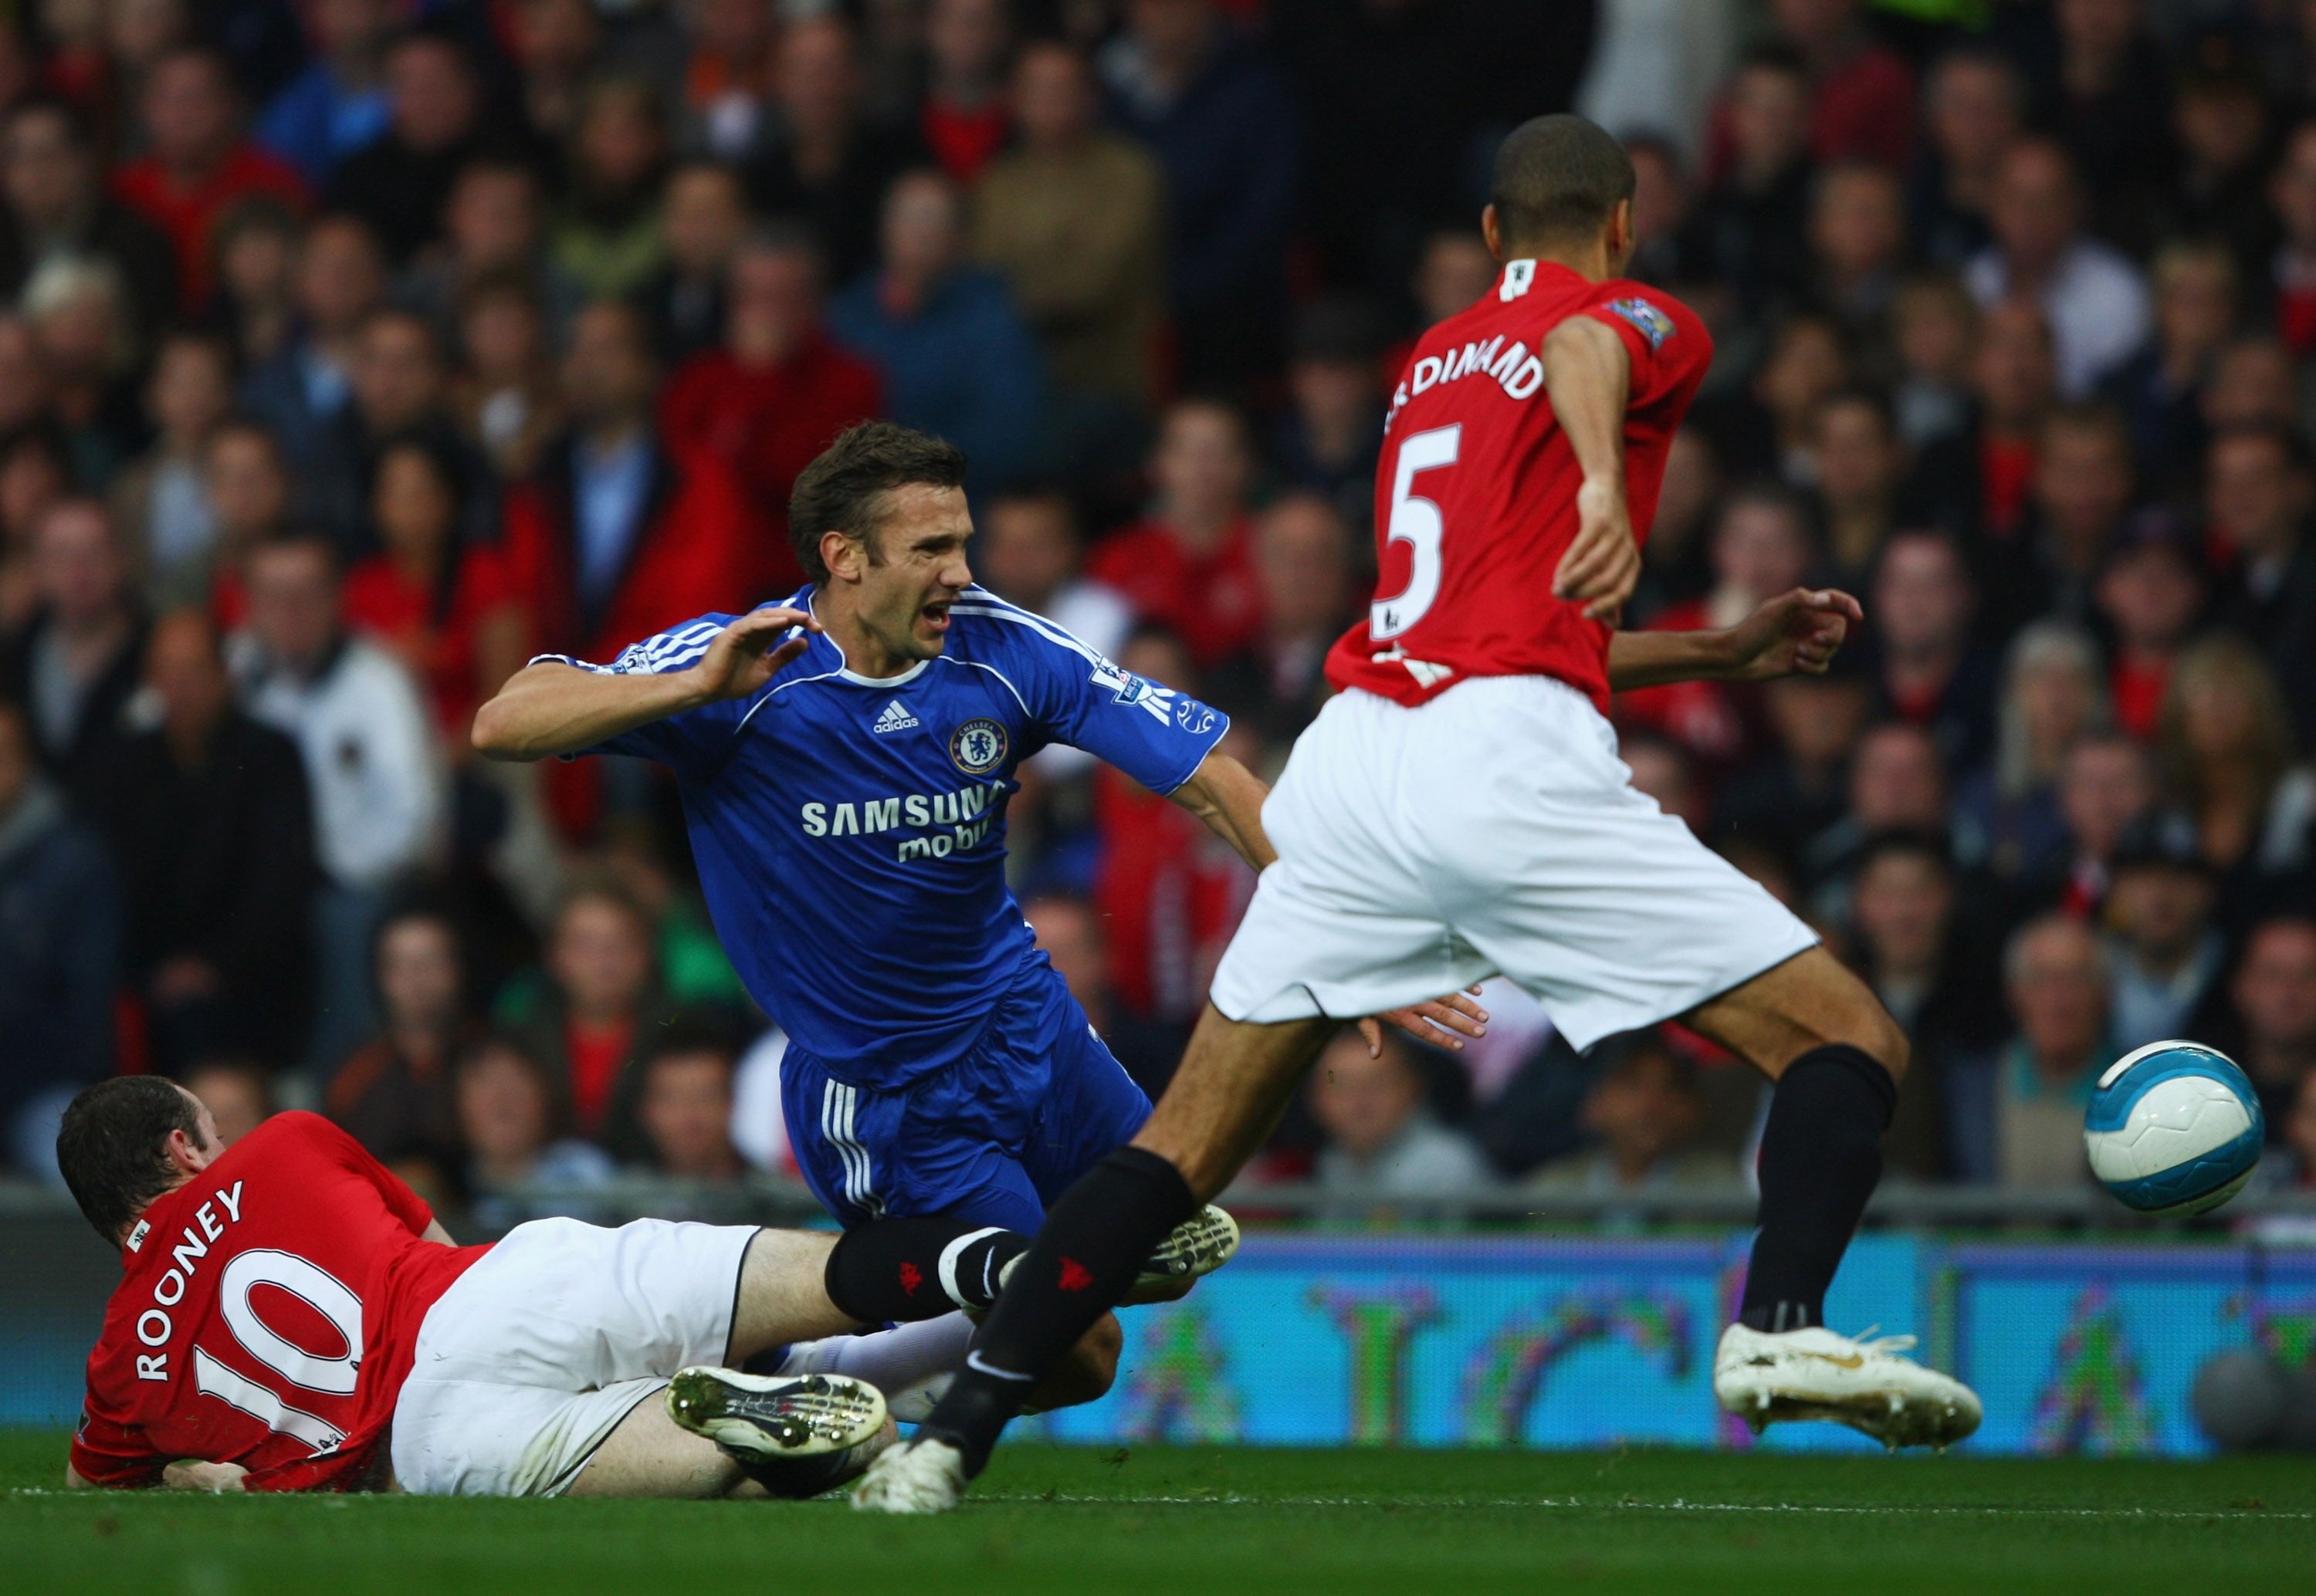 MANCHESTER, UNITED KINGDOM - SEPTEMBER 23: Andriy Shevchenko of Chelsea is tackled by Wayne Rooney of Manchester United as Rio Ferdiand look on during the Barclays Premier League match between Manchester United and Chelsea at Old Trafford on September 23, 2007 in Manchester, England. (Photo by Clive Brunskill/Getty Images)